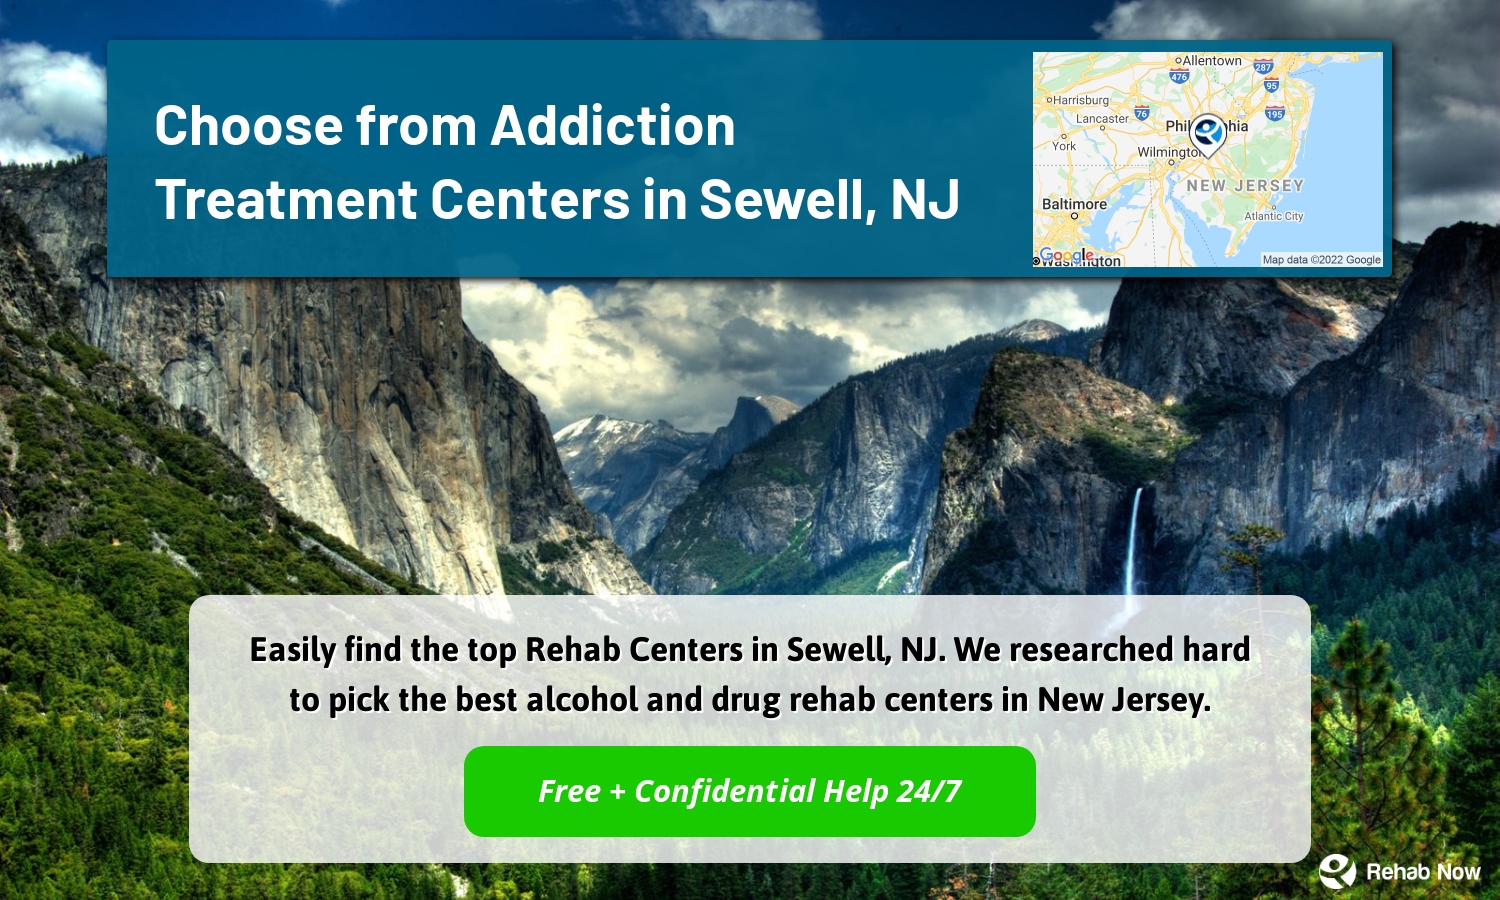 Easily find the top Rehab Centers in Sewell, NJ. We researched hard to pick the best alcohol and drug rehab centers in New Jersey.